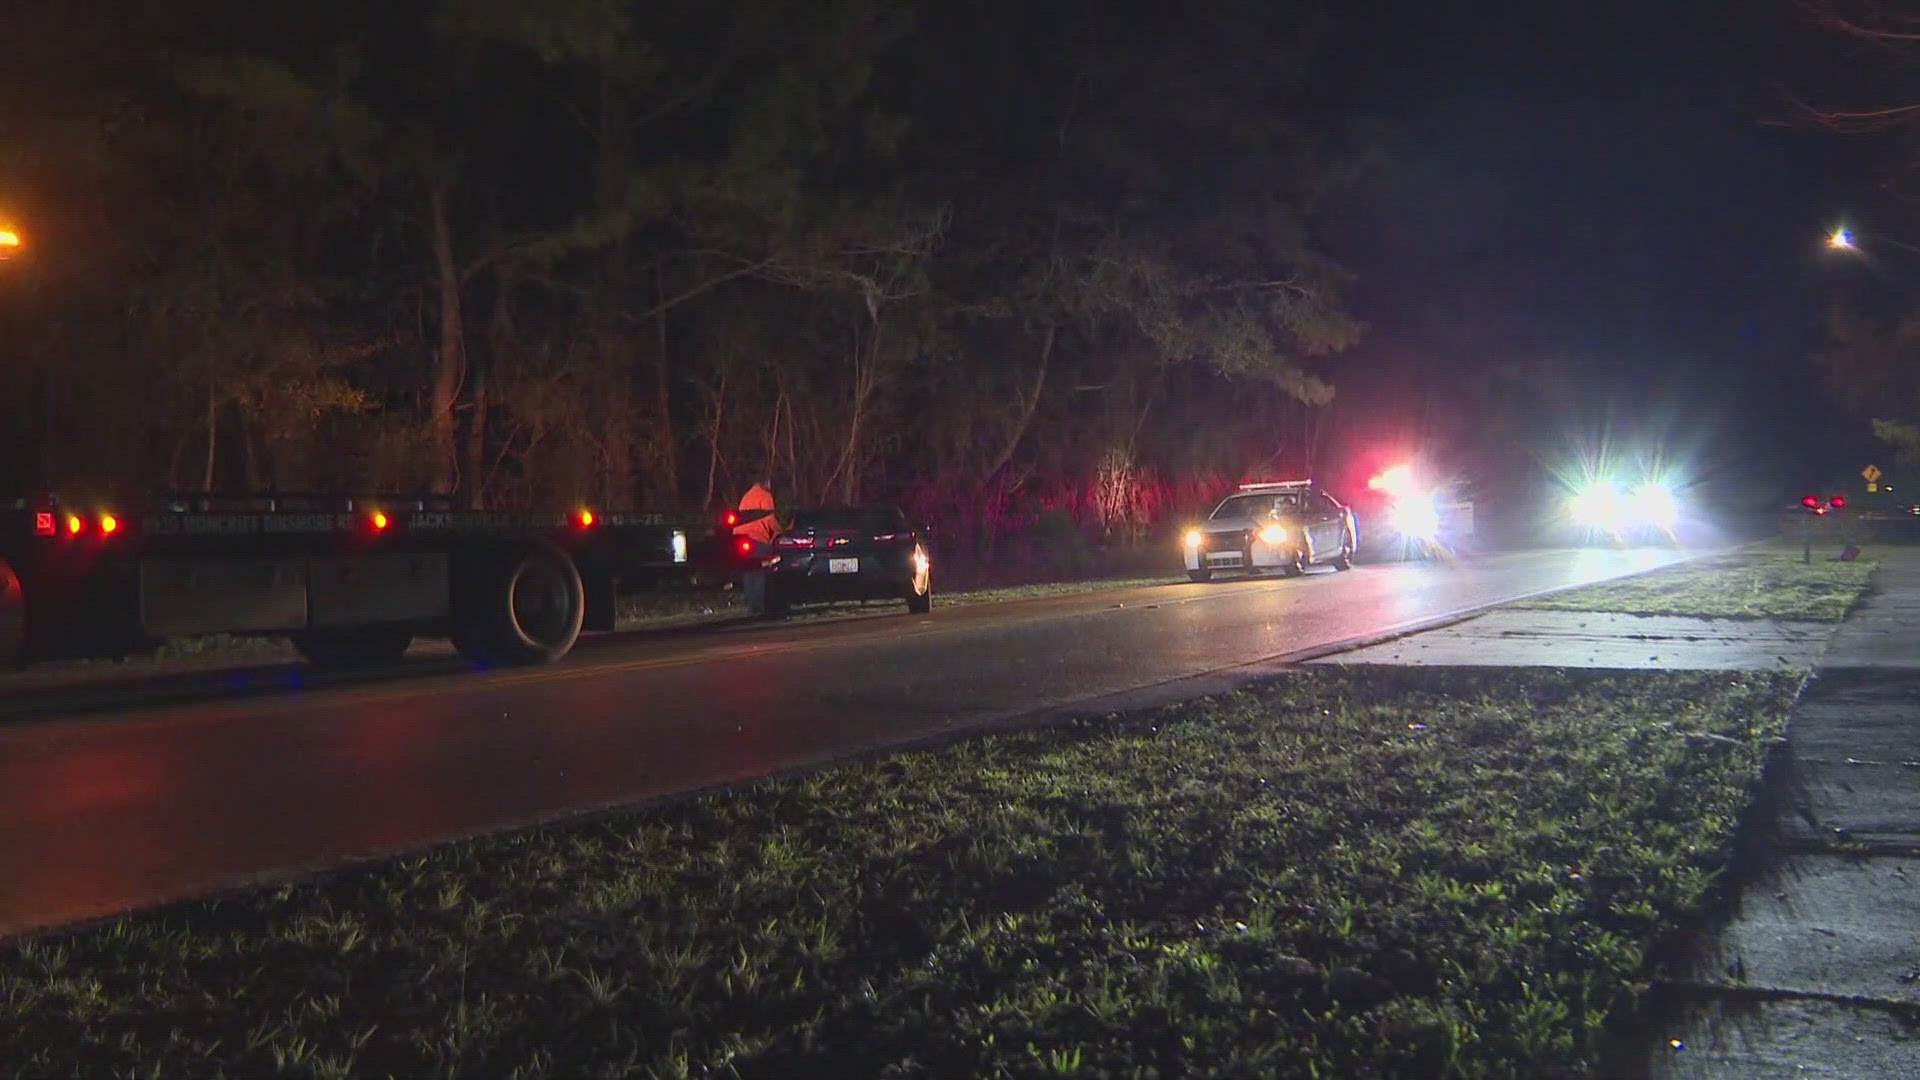 The Jacksonville Sheriff's Office says three people were hit by a vehicle on Starratt Road Tuesday after they were all involved in an altercation prior to collision.